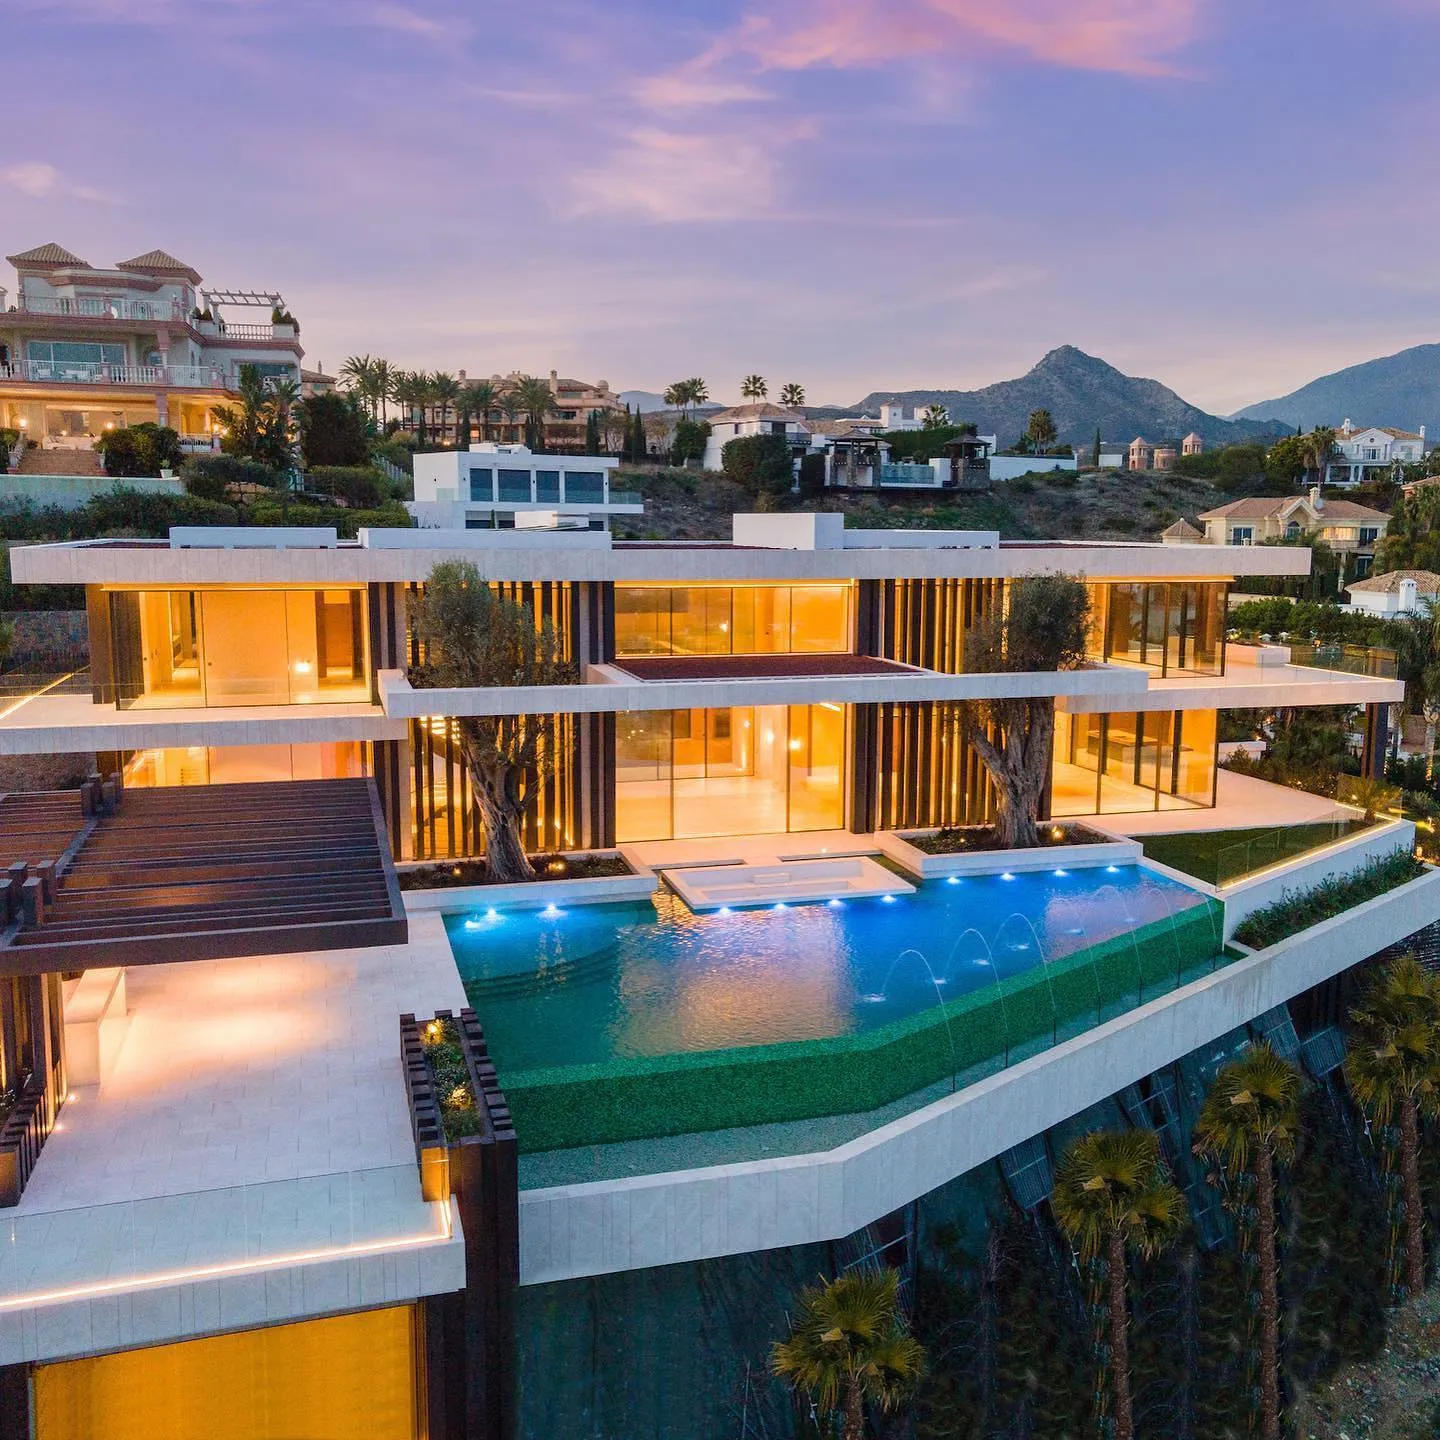 MANSIONIFY - Take a look inside this stunning €20,000,000 Marbella Estate